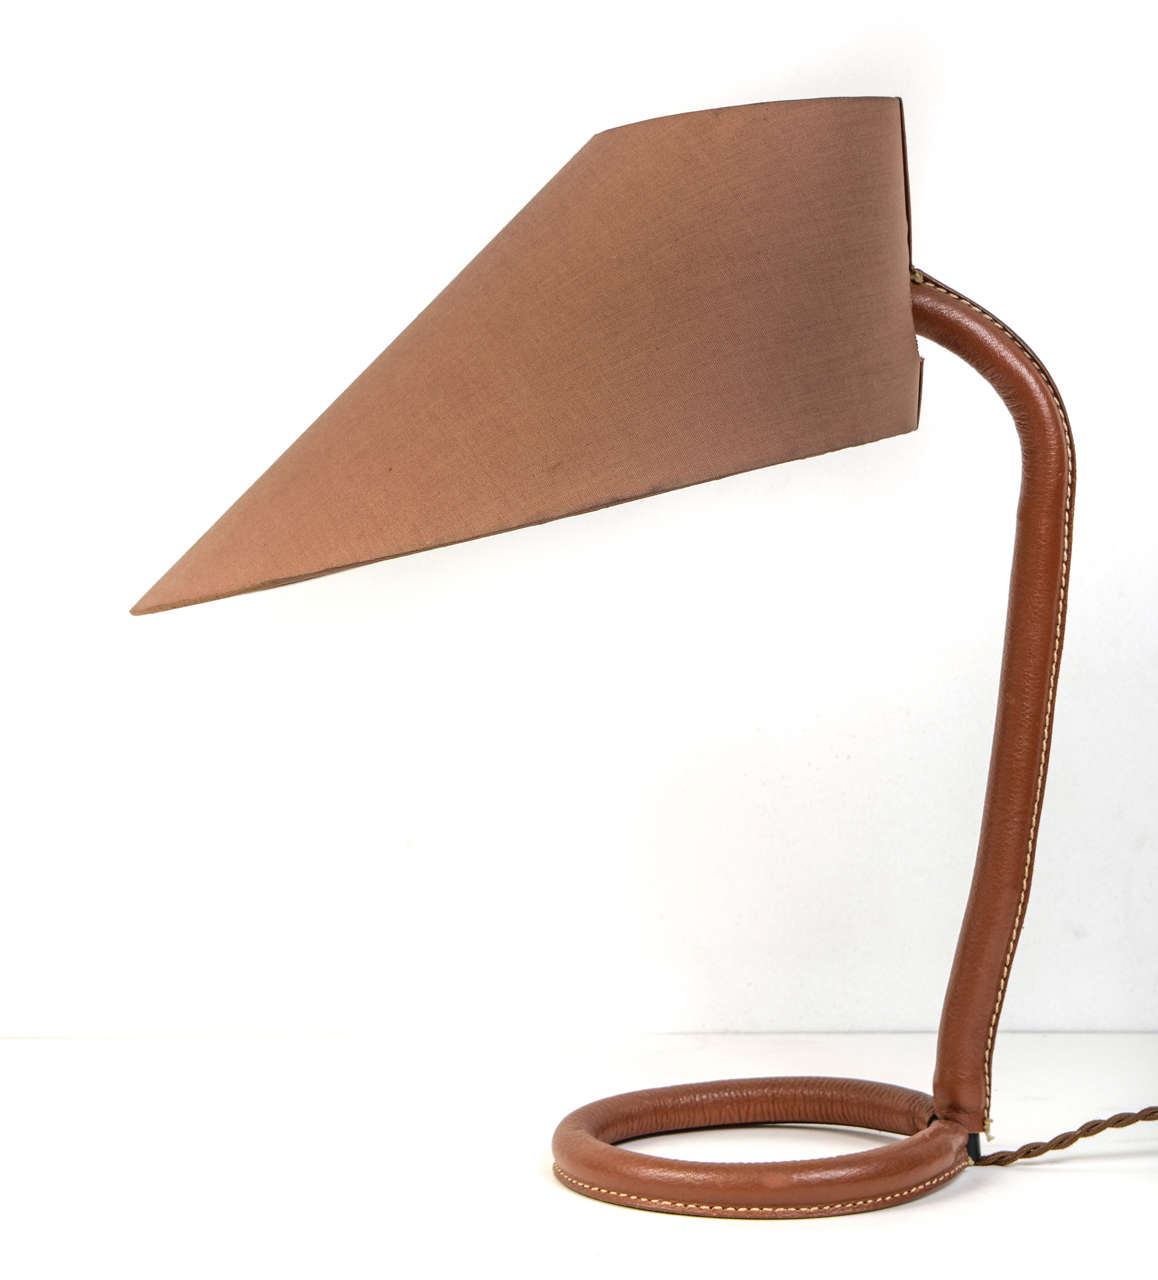 French Original table lamp by Jacques Adnet, 1950's